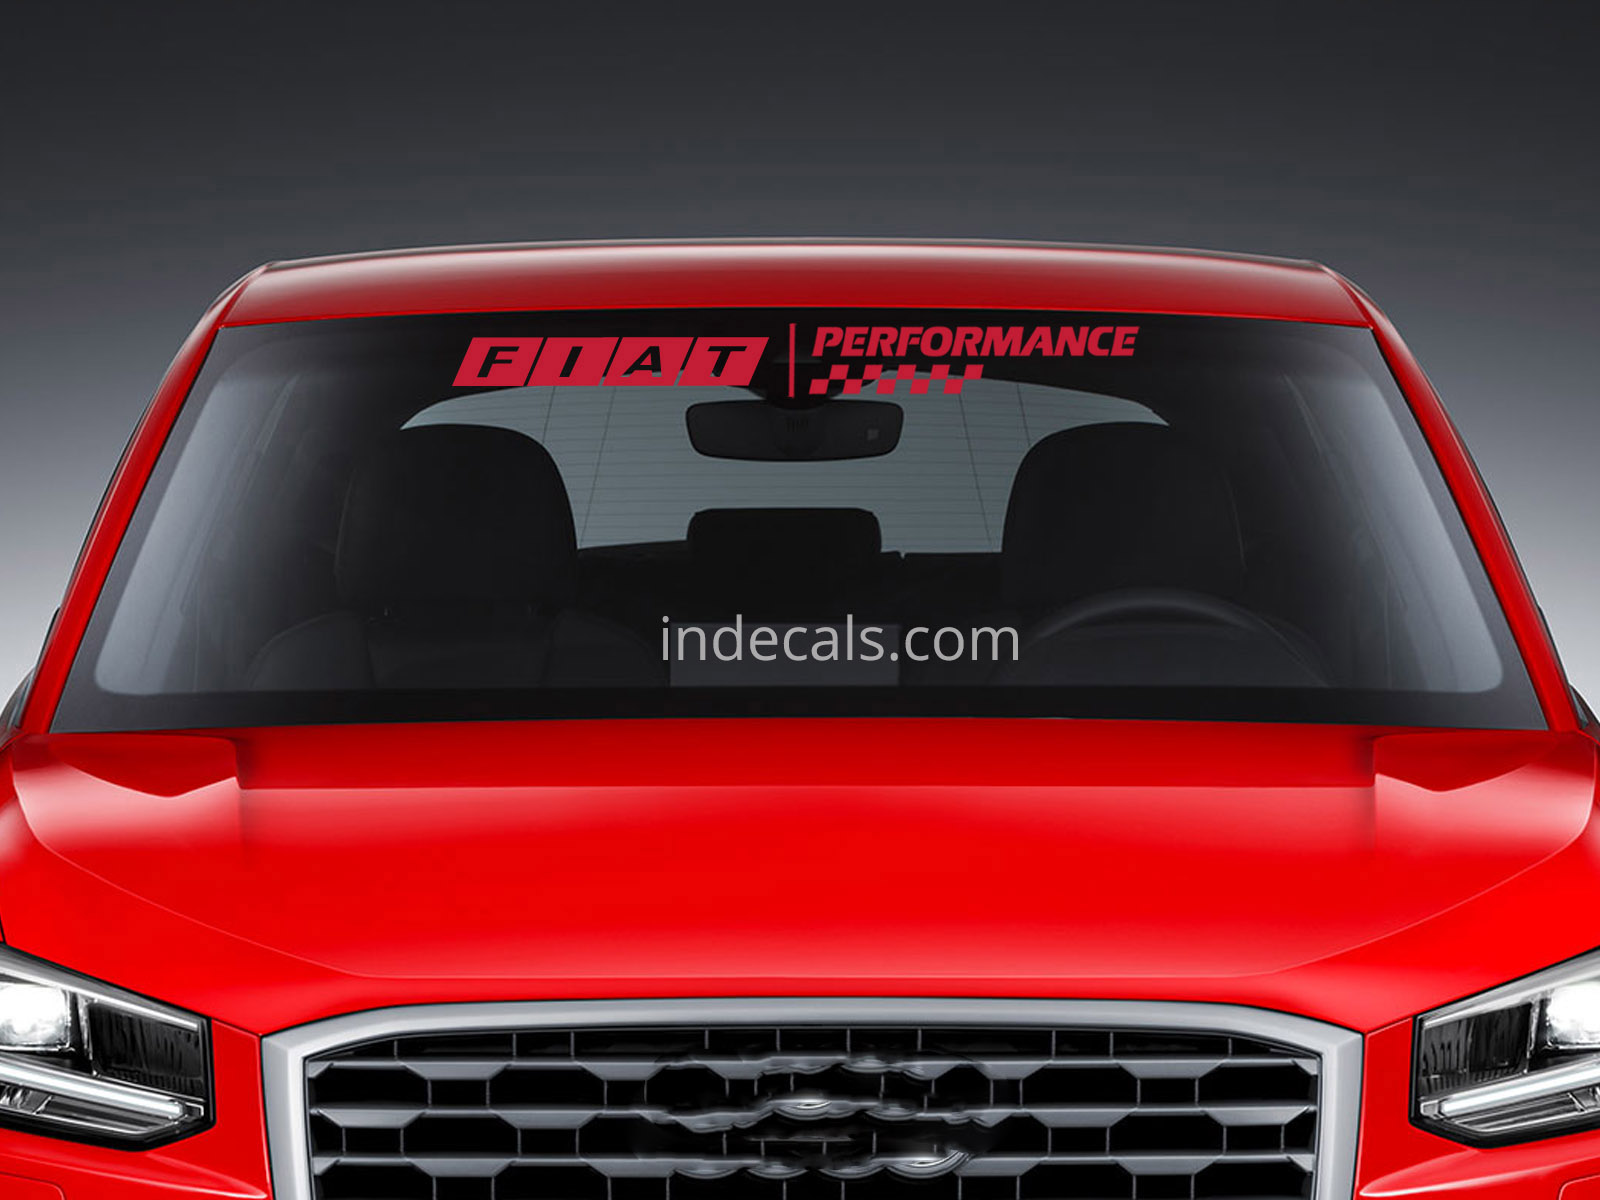 1 x Fiat Performance Sticker for Windshield or Back Window - Red